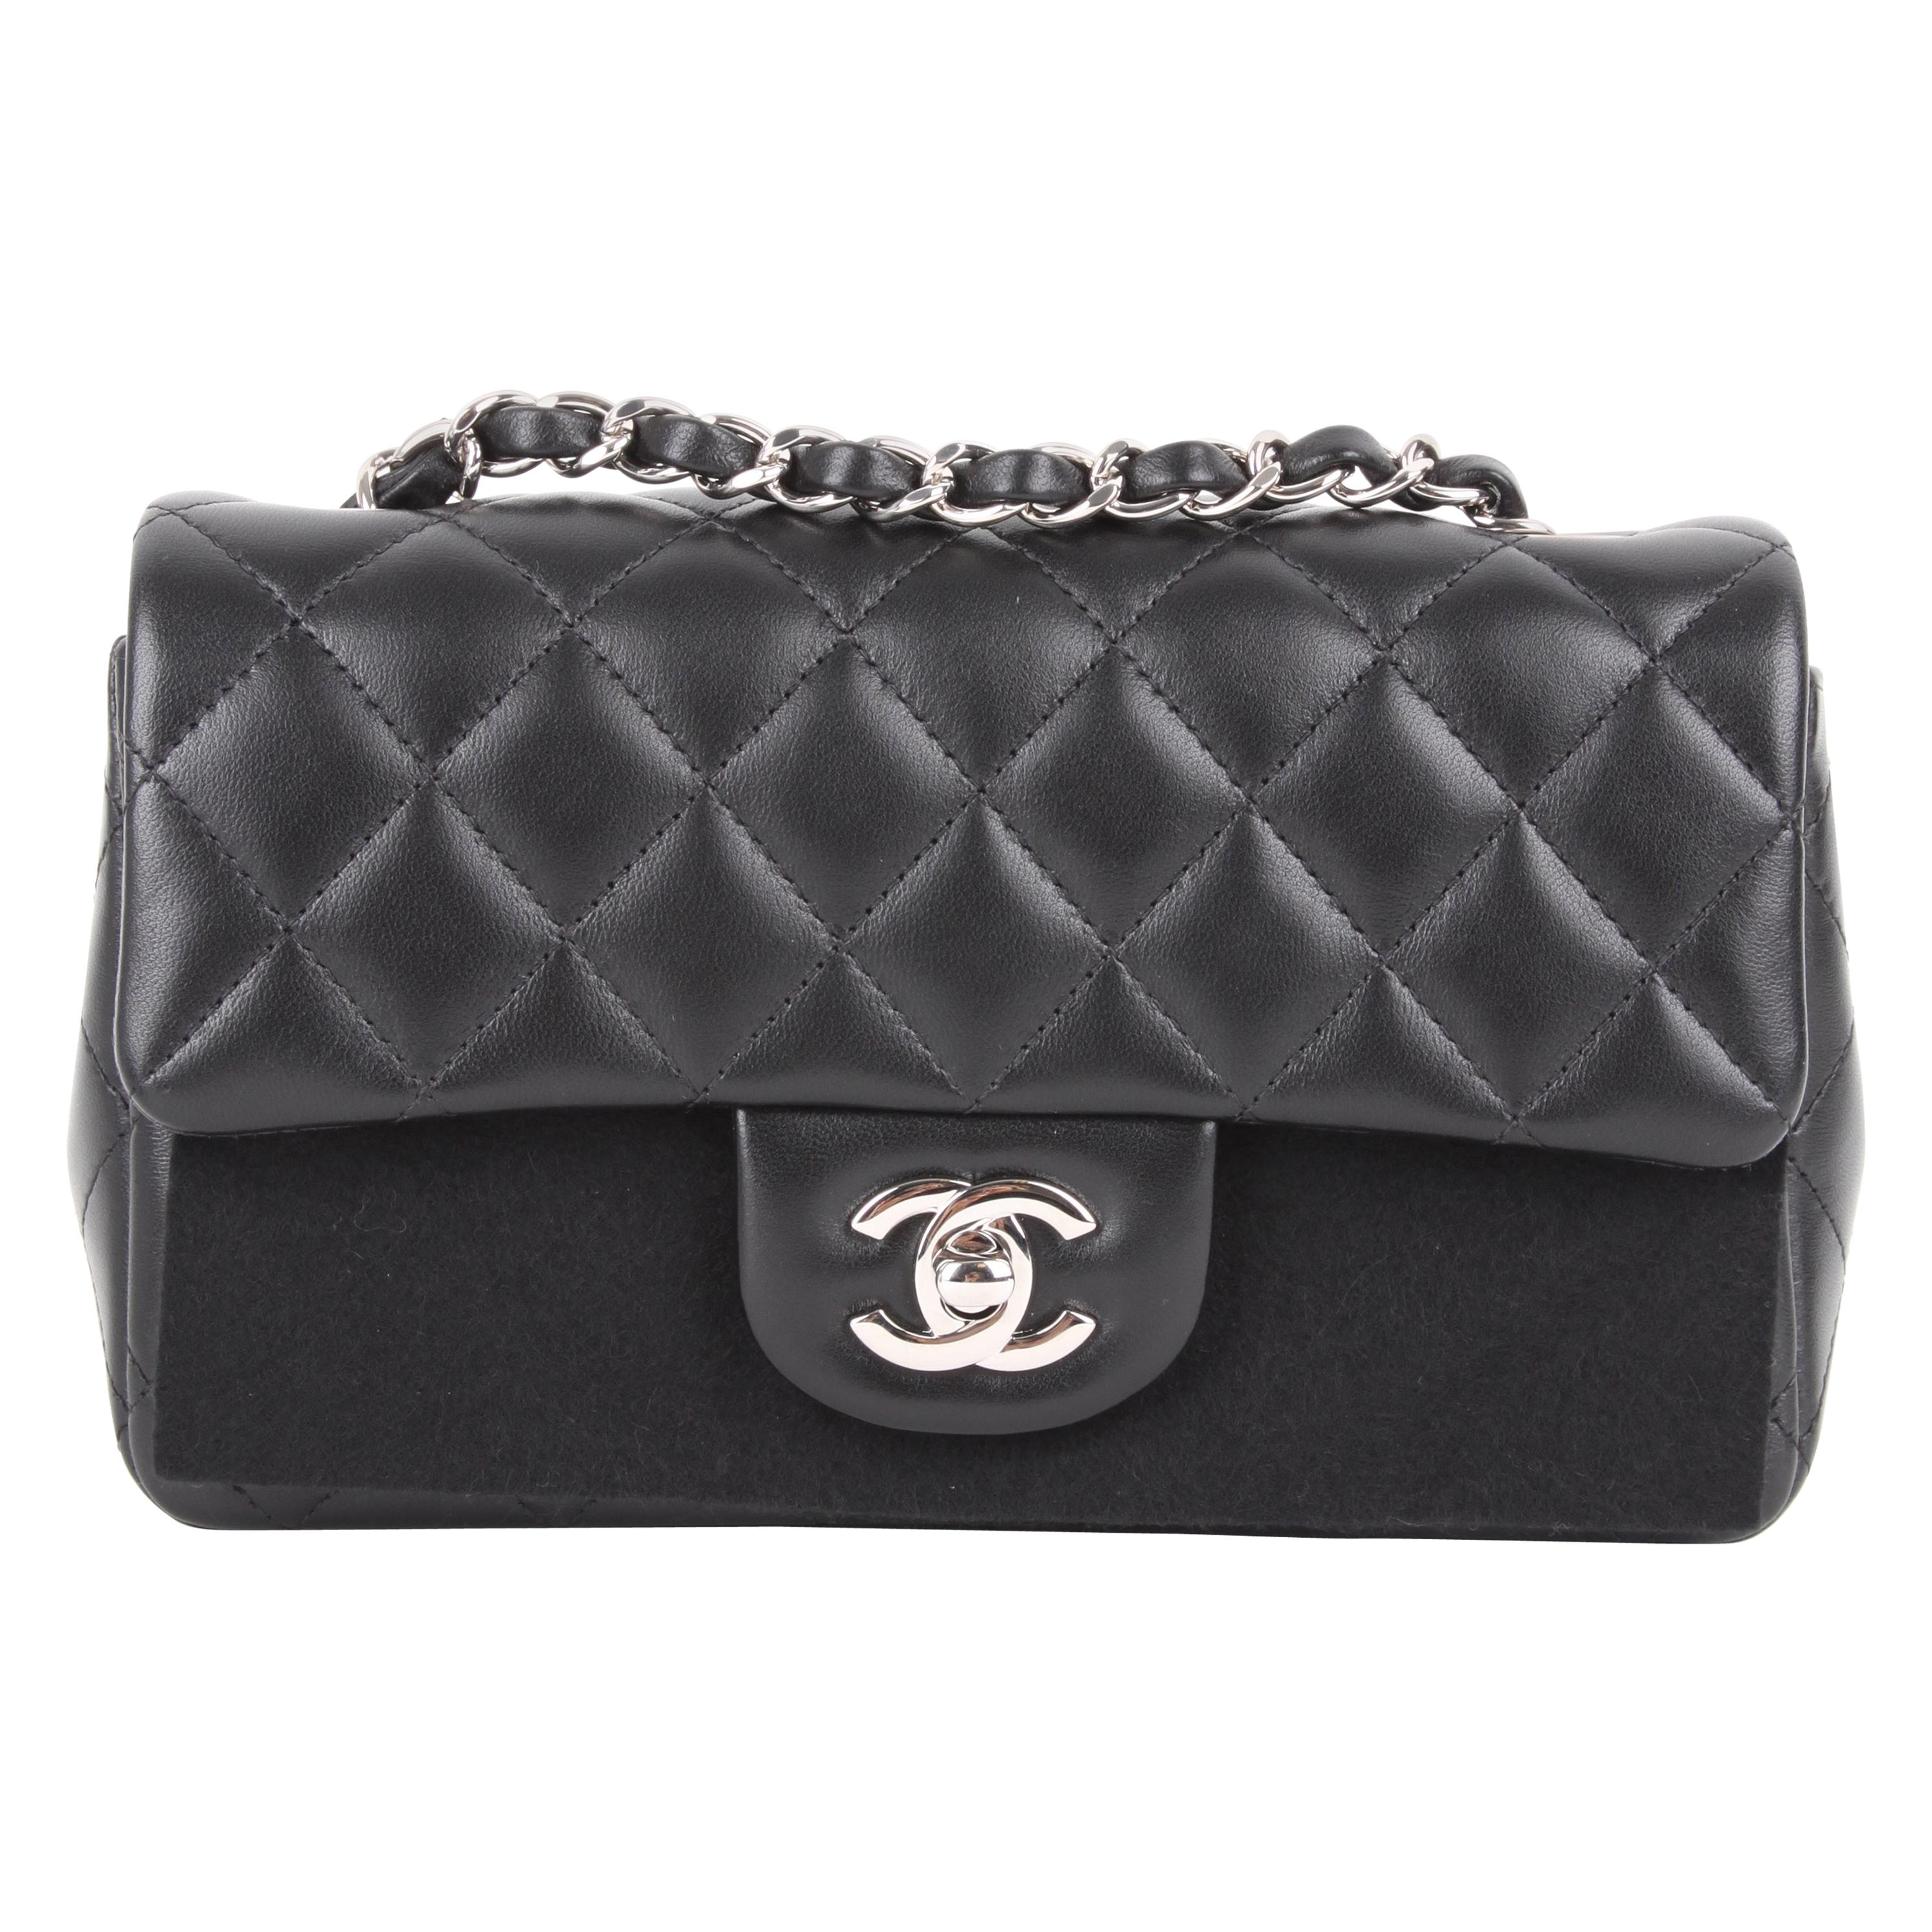 COLOR: Black
MATERIAL: Lmabskin leather
HARDWARE: Silver
CONDITION: New Store Fresh 
COMES WITH: Full Chanel Set
MEASURES: B 20 cm, H 12 cm, D 7 cm.
ORGIN: France
AVAILABILITY: ready to ship